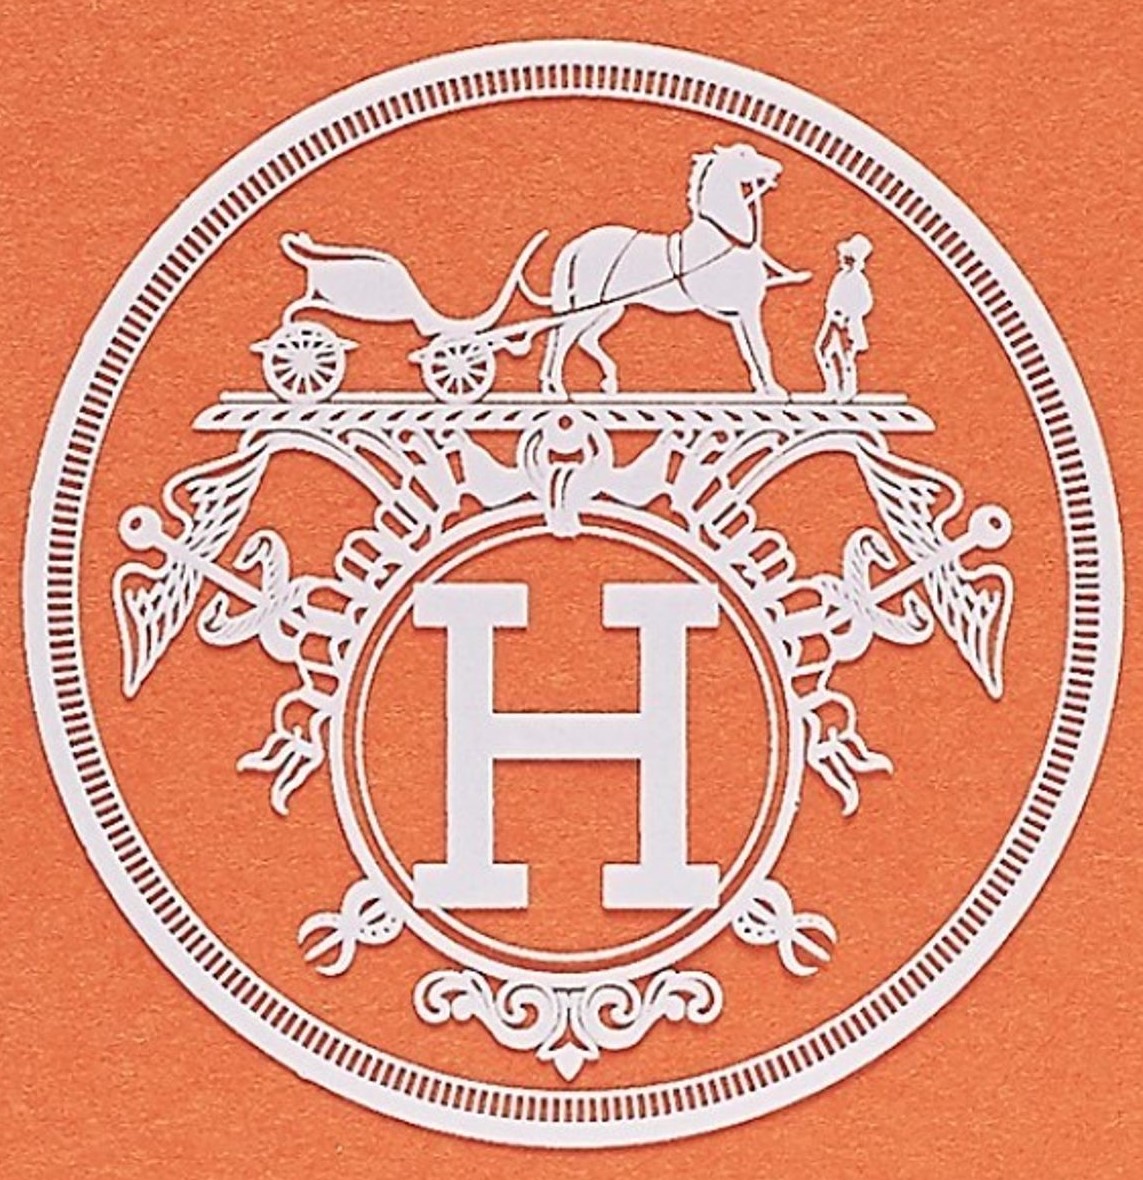 The logo of the French brand "Hermès"